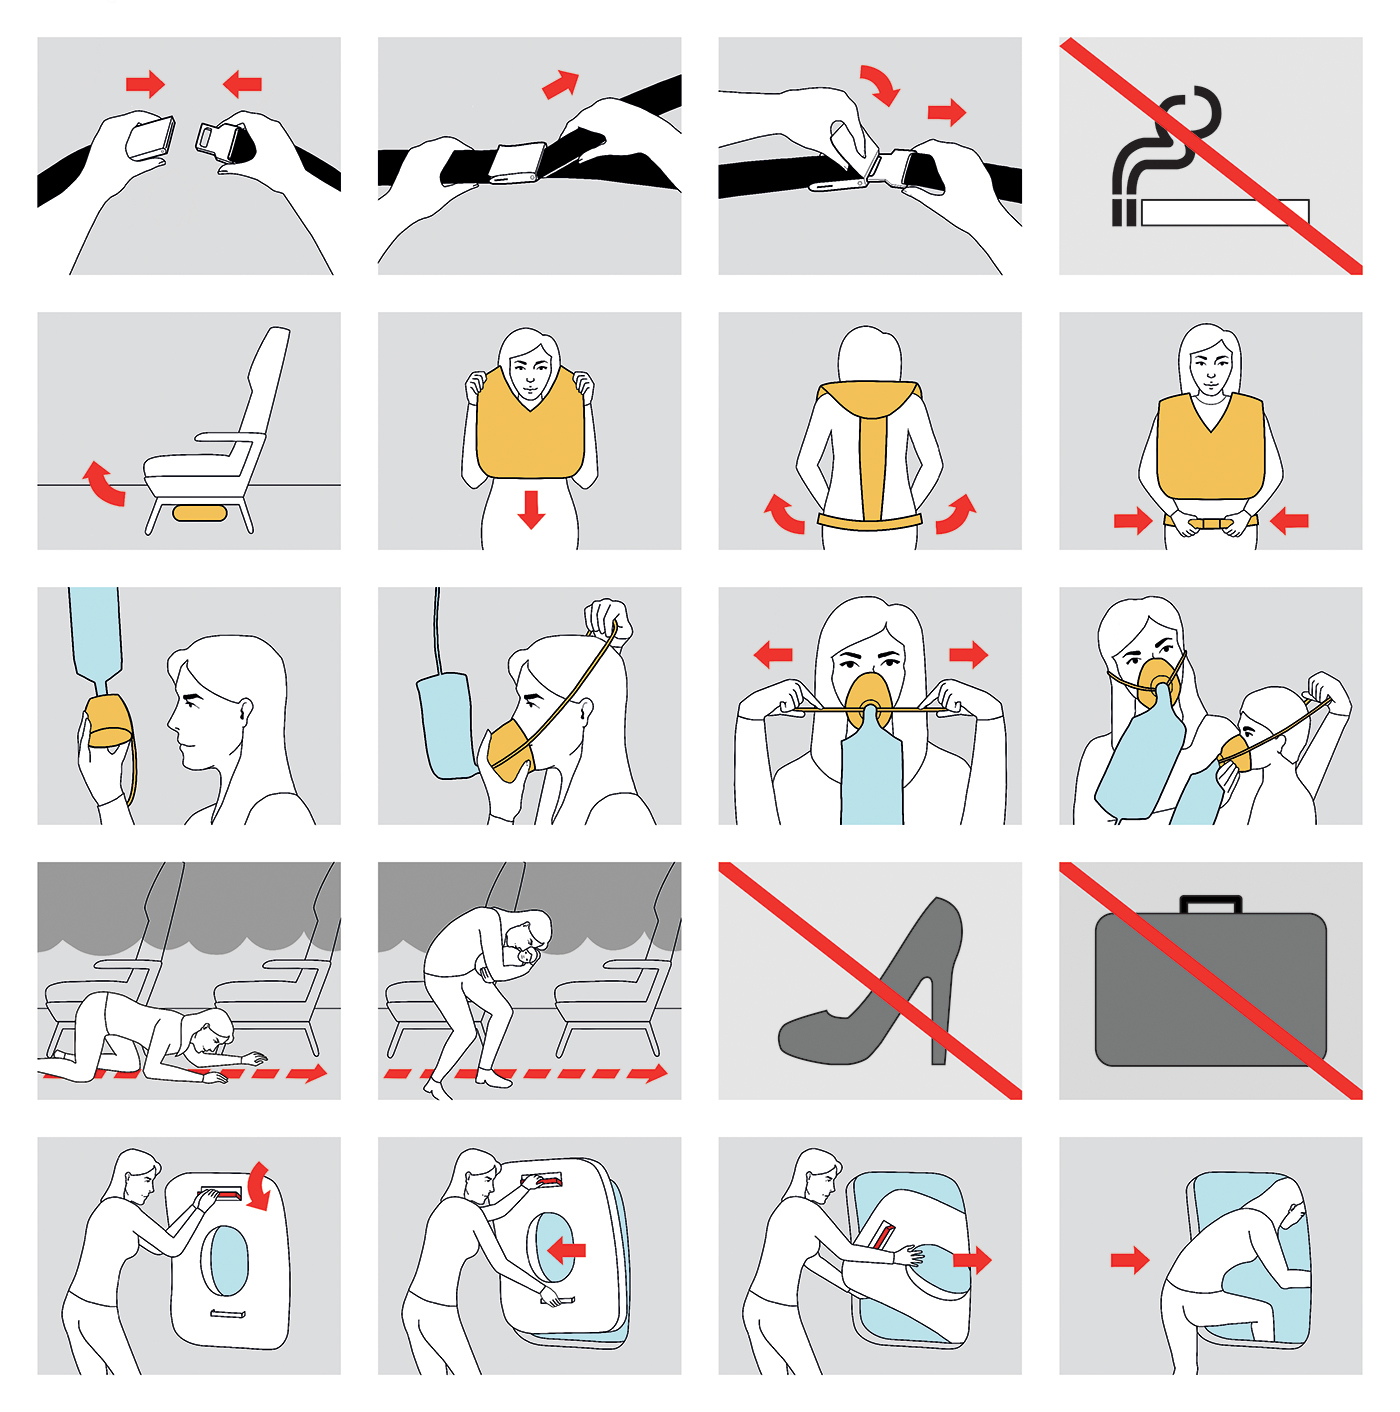 Aircraft safety card cards Airlines adria emergency instruction infographics pictograms